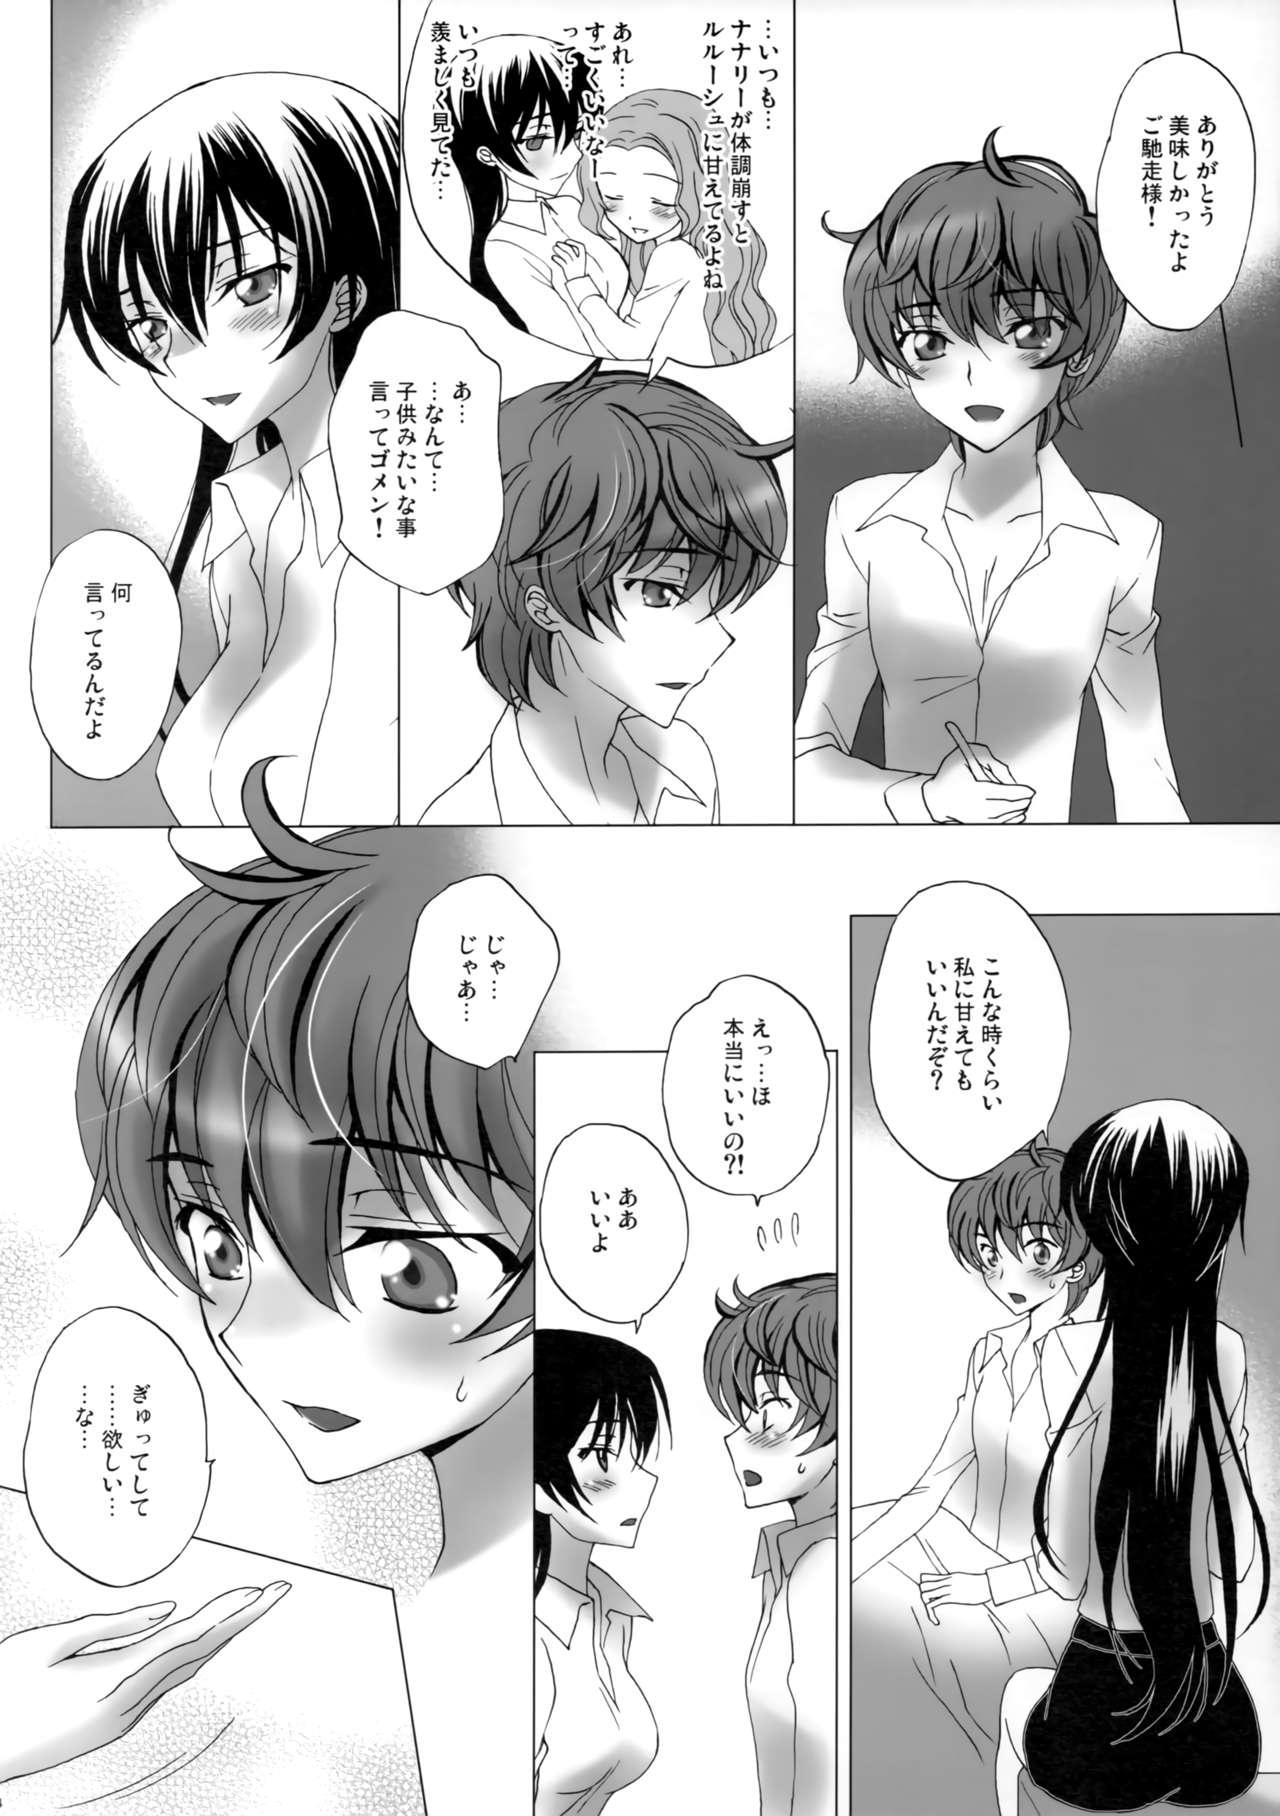 Role Play Love Bless - Code geass Bang - Page 3